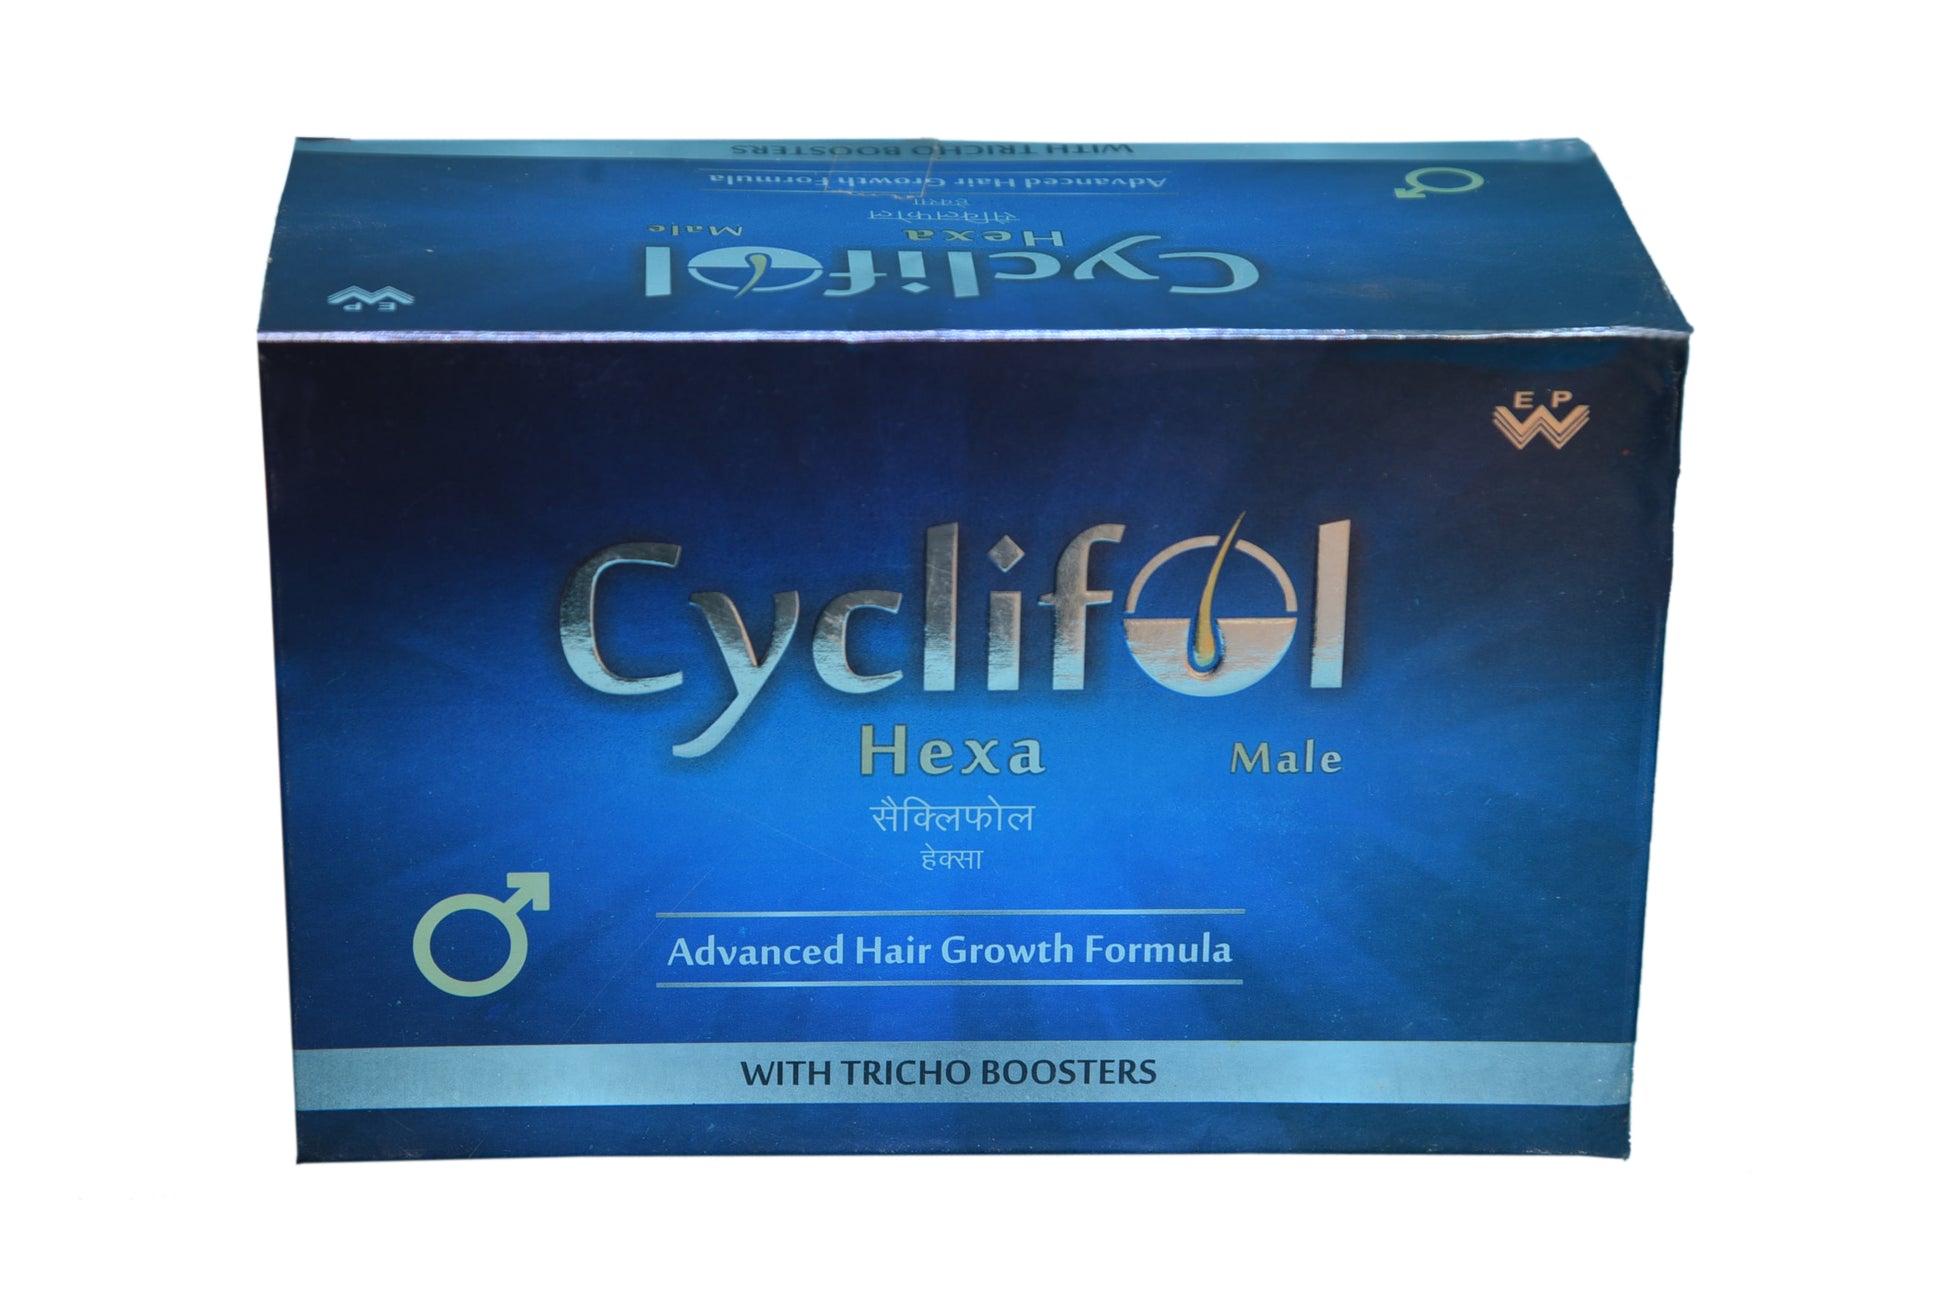 Cyclifol Hexa Male is specially designed kit for hair growth stopping hair loss and for Increase in hair Density developed by East West Pharma .